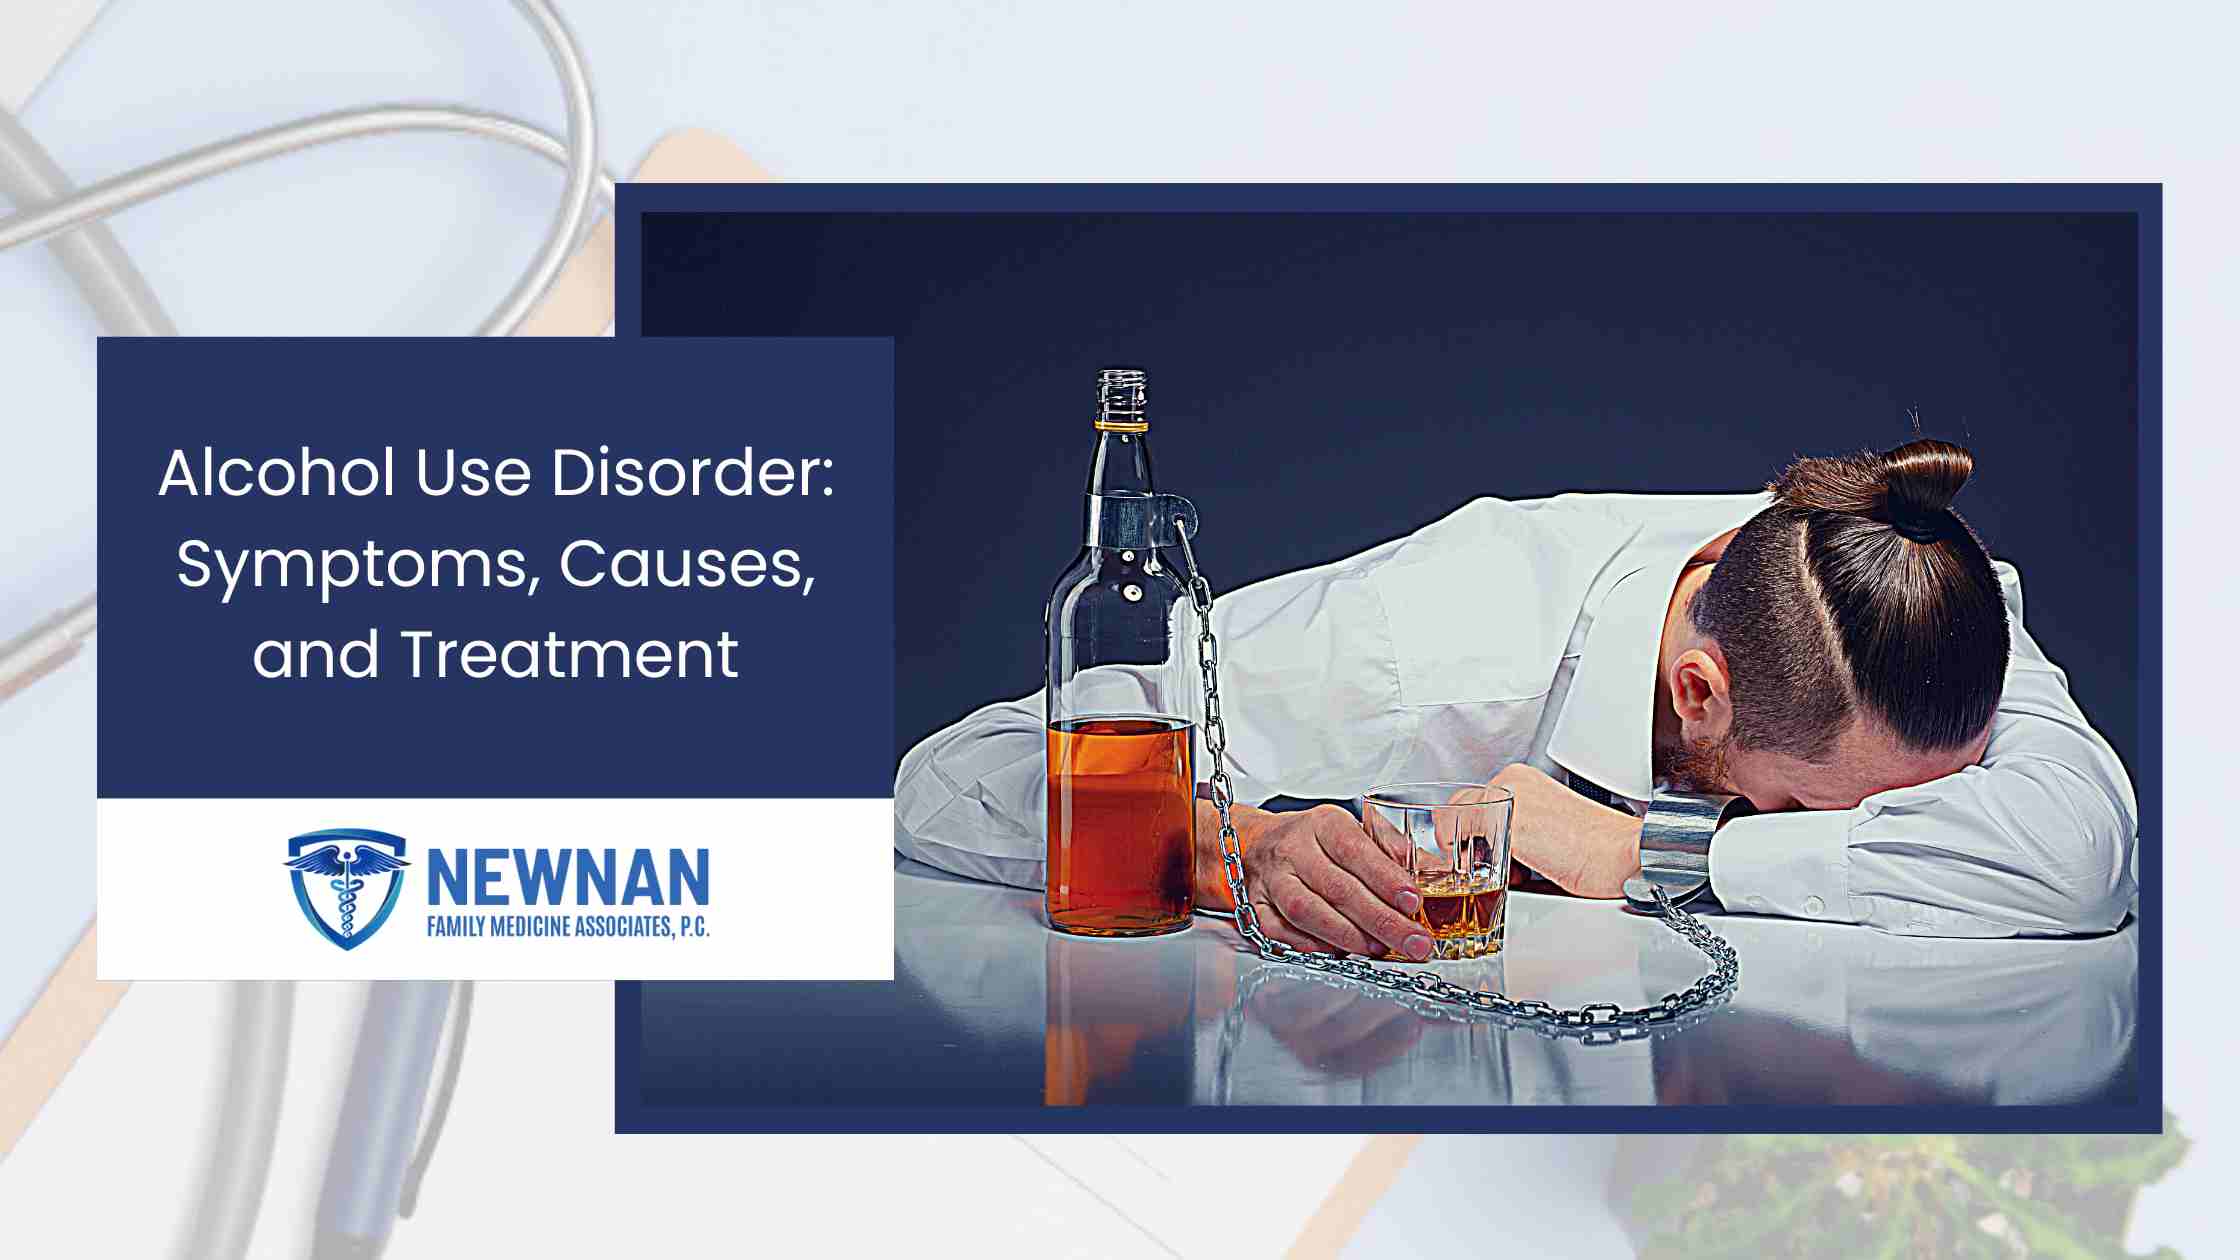 Alcohol Use Disorder: Symptoms, Causes, and Treatment